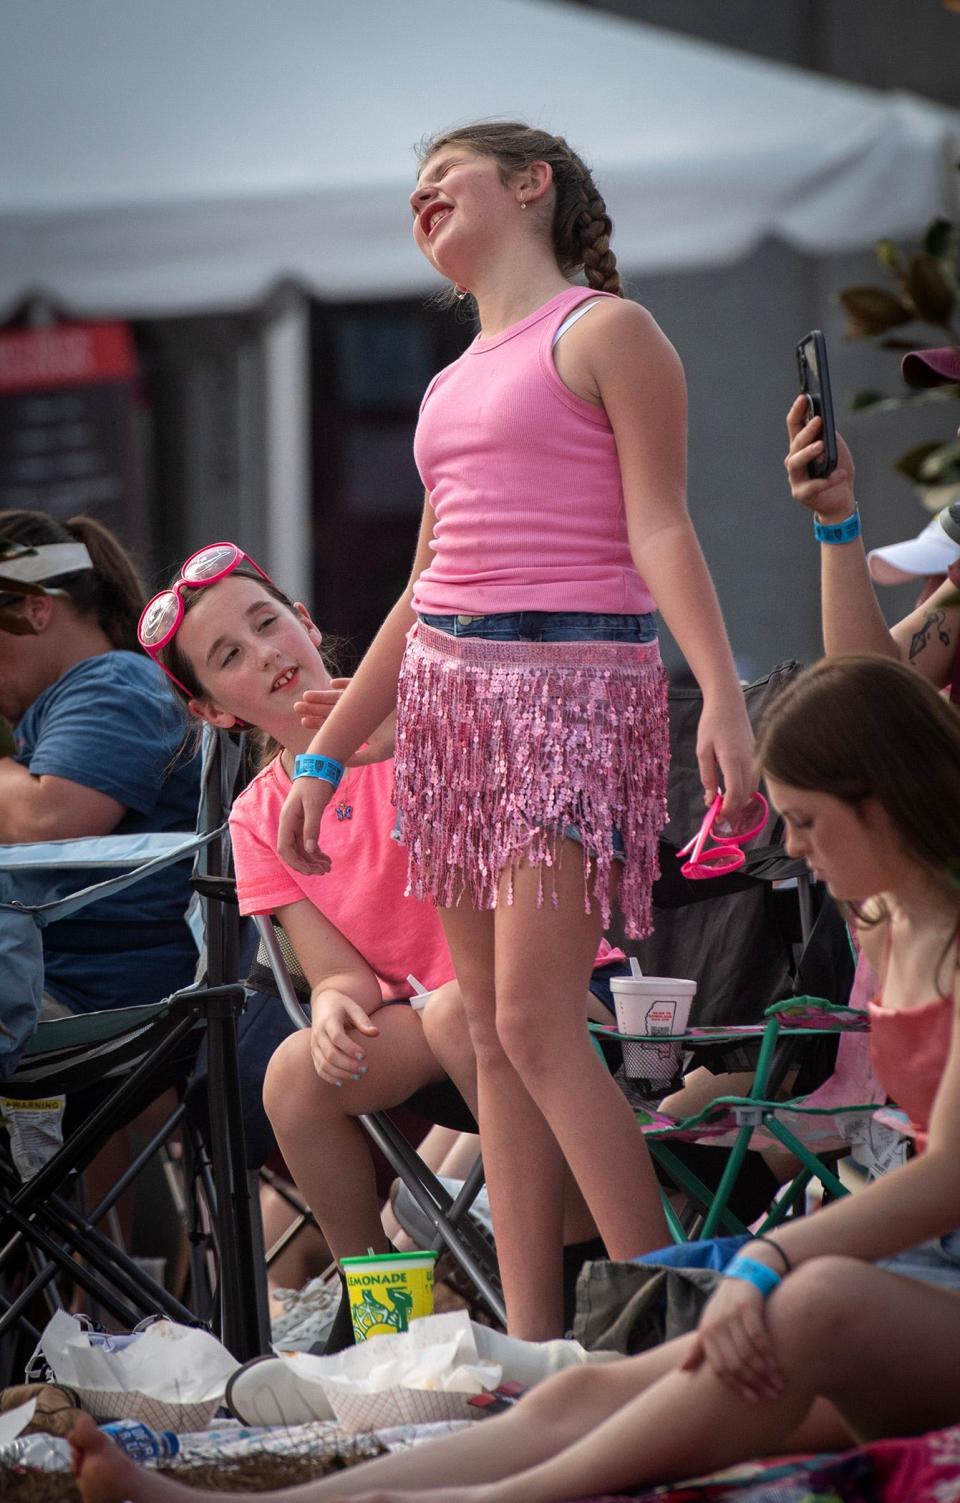 Laynie-Grace Seale, 9, of Meridian, Miss., sings "Jolene" with Dolly Parton during the live feed outside her concert at the Ellis Theater in Philadelphia Saturday, Aug. 26, 2023. Seale is celebrating her birthday at the concert. "Dolly is her favorite person in the whole wide world," her mother said.